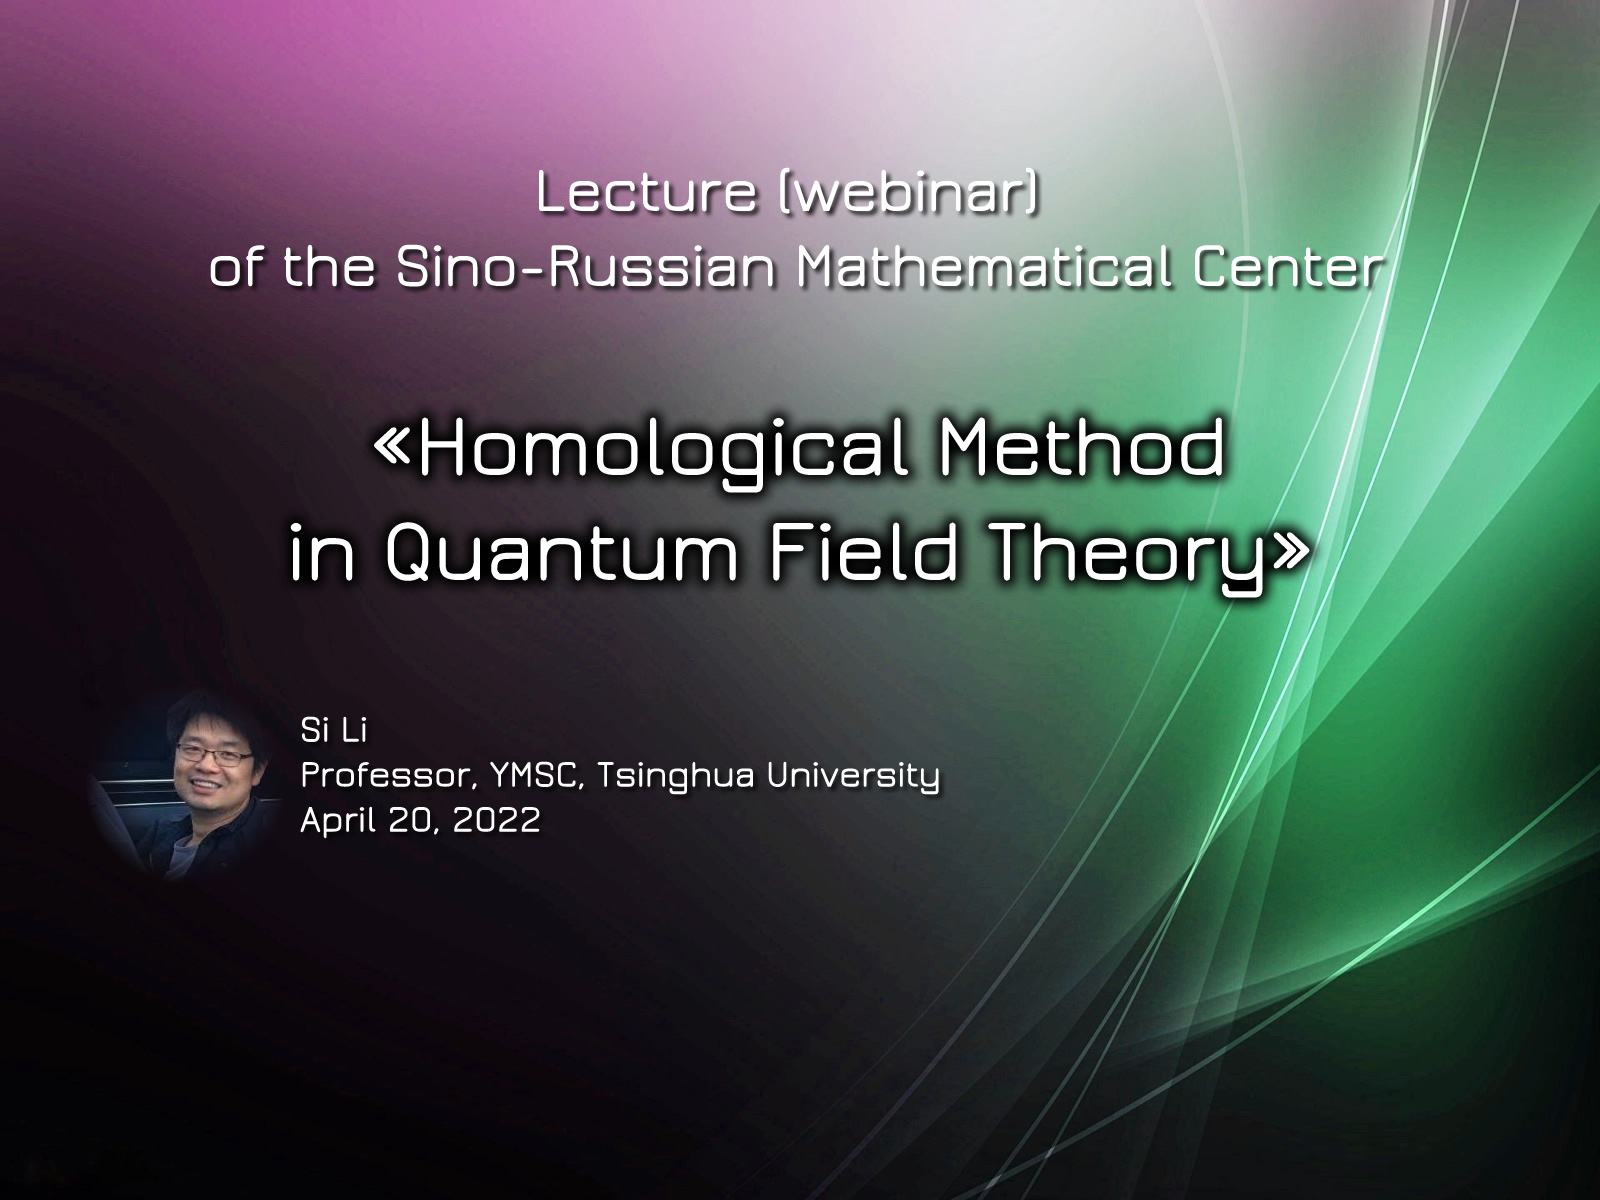 «Homological Method in Quantum Field Theory» 20.04.2022